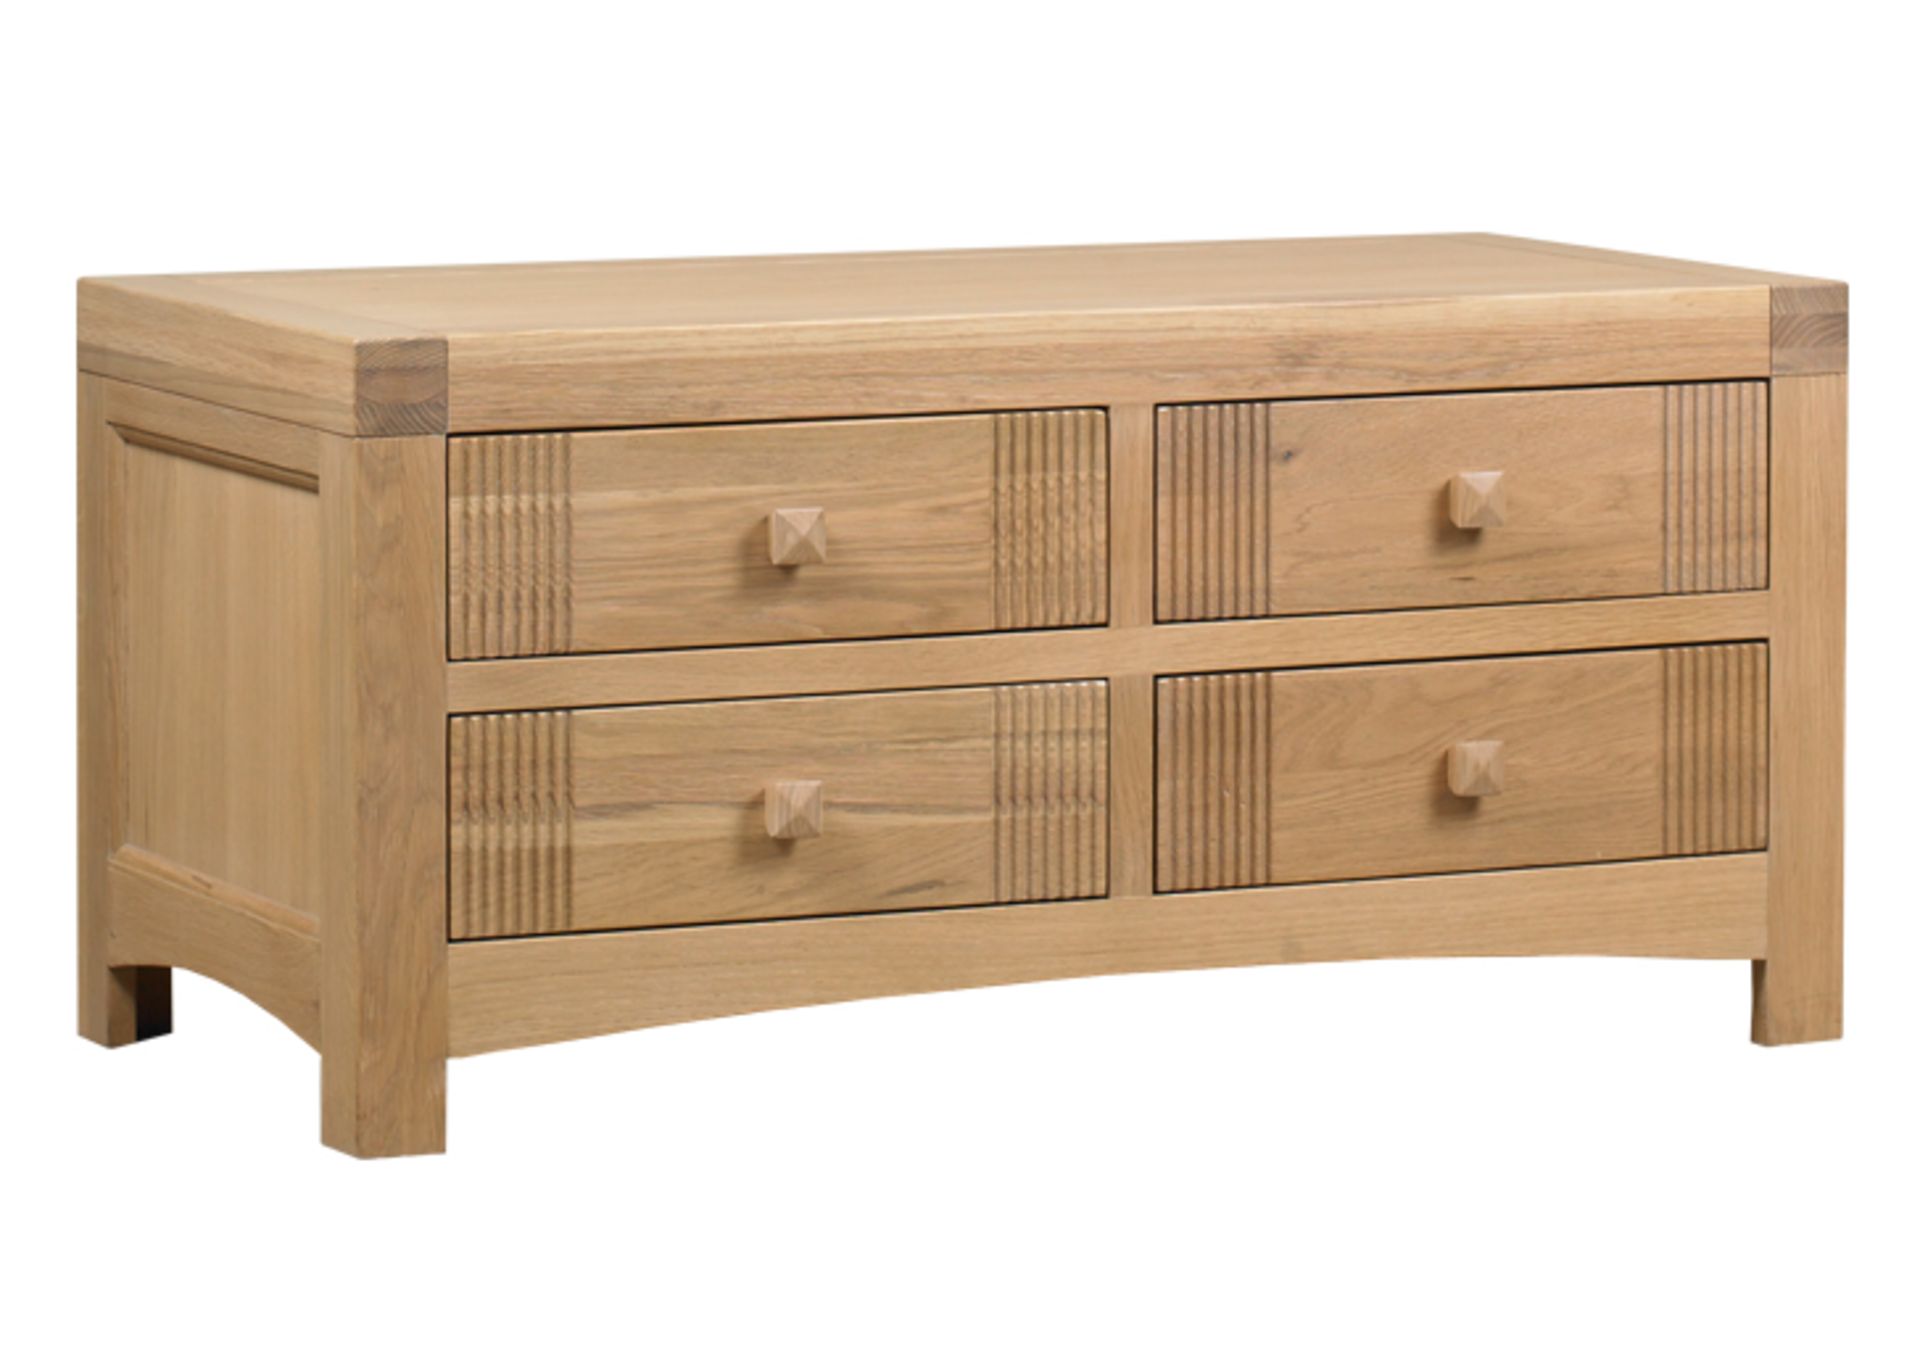 1 x Mark Webster Buckingham Coffee Table With Drawers - White Wash Oak With a Timeless Design - Full - Image 4 of 4